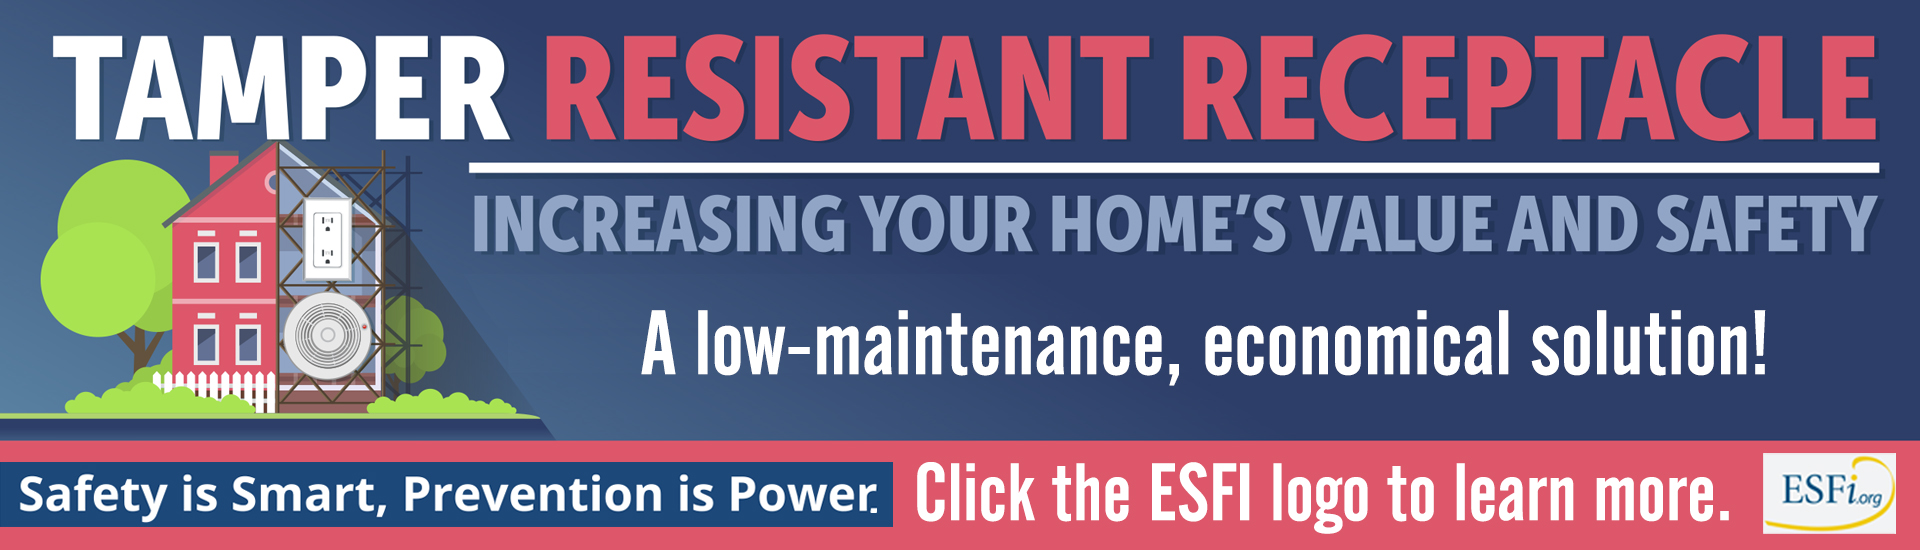 Tamper resistant receptacles.increase your home value and safety.